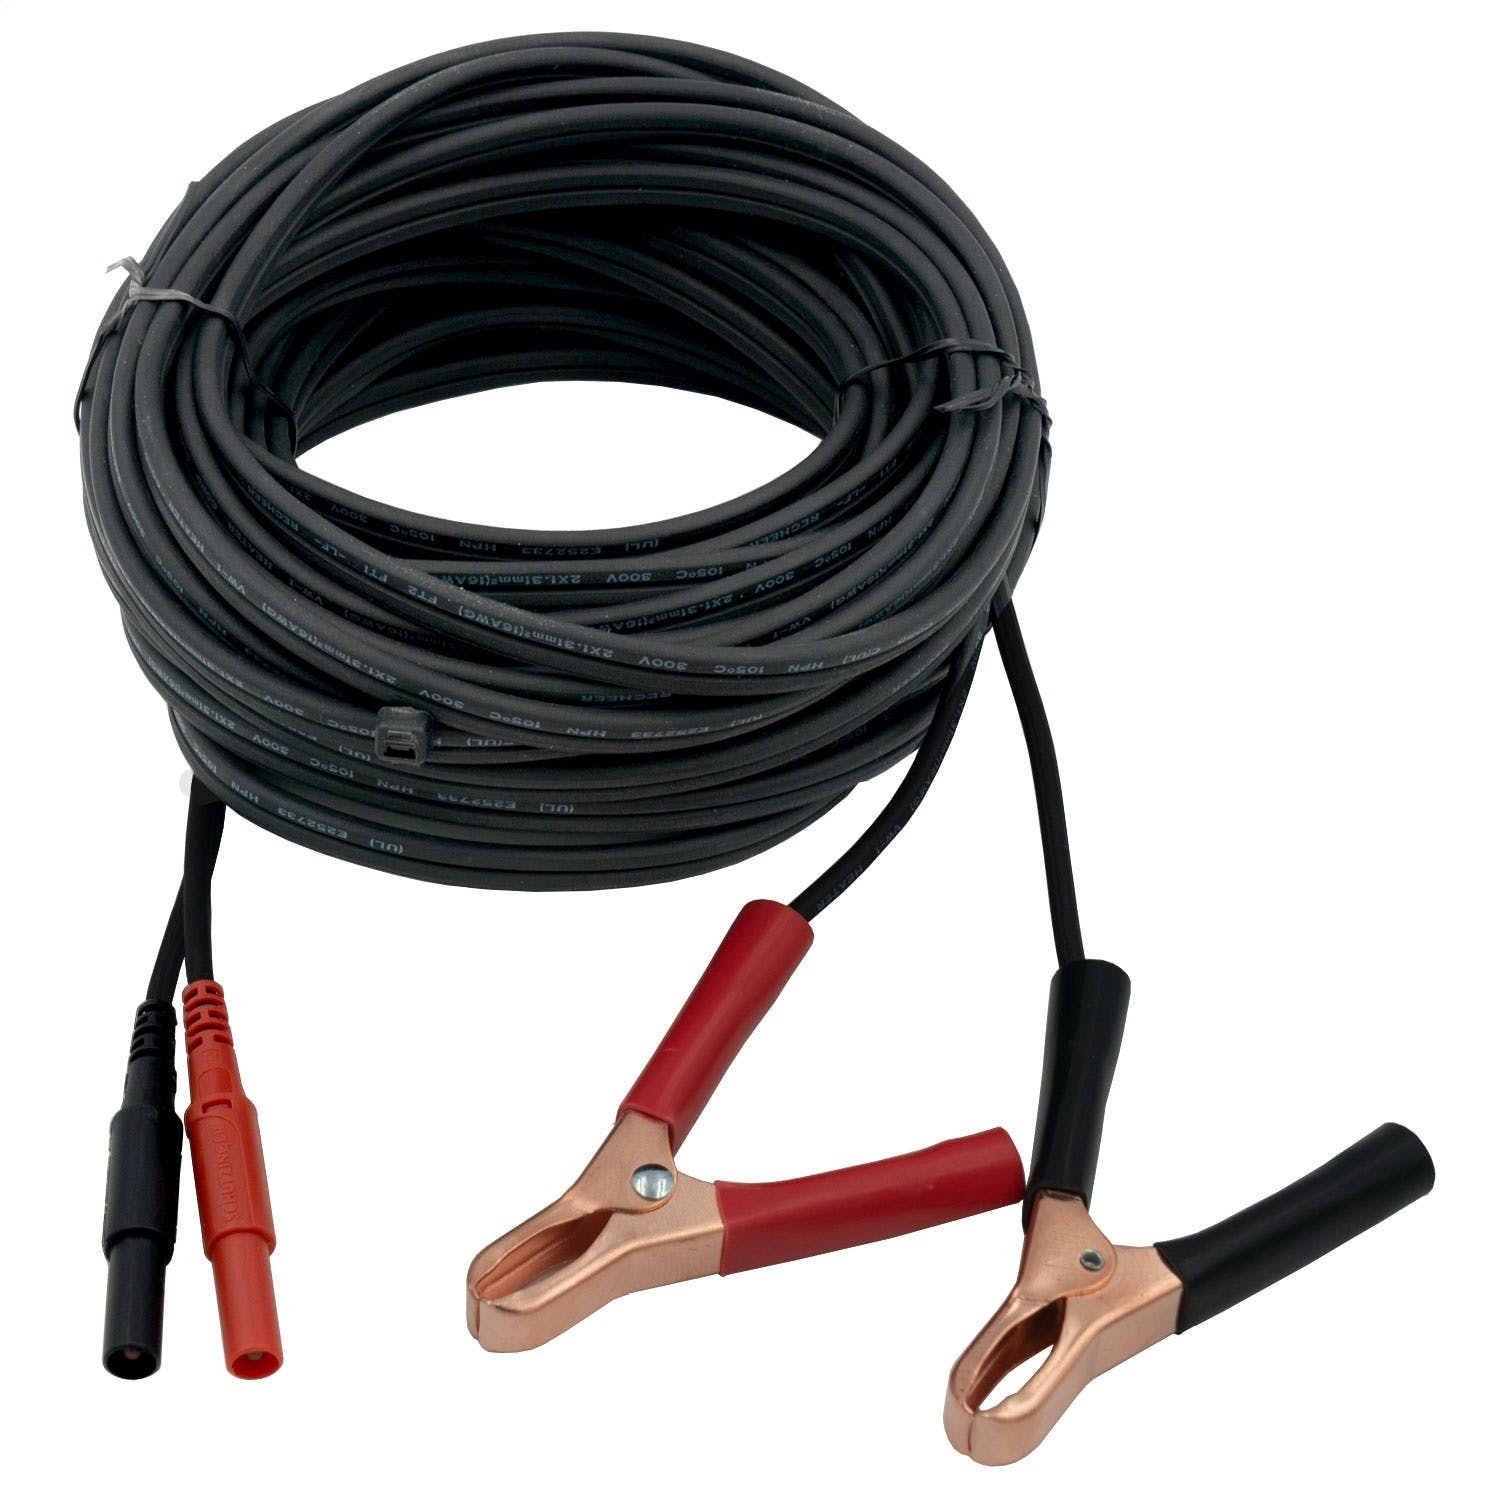 AutoMeter Products AC-95 45' Voltage Drop Test Lead Set, Insulated